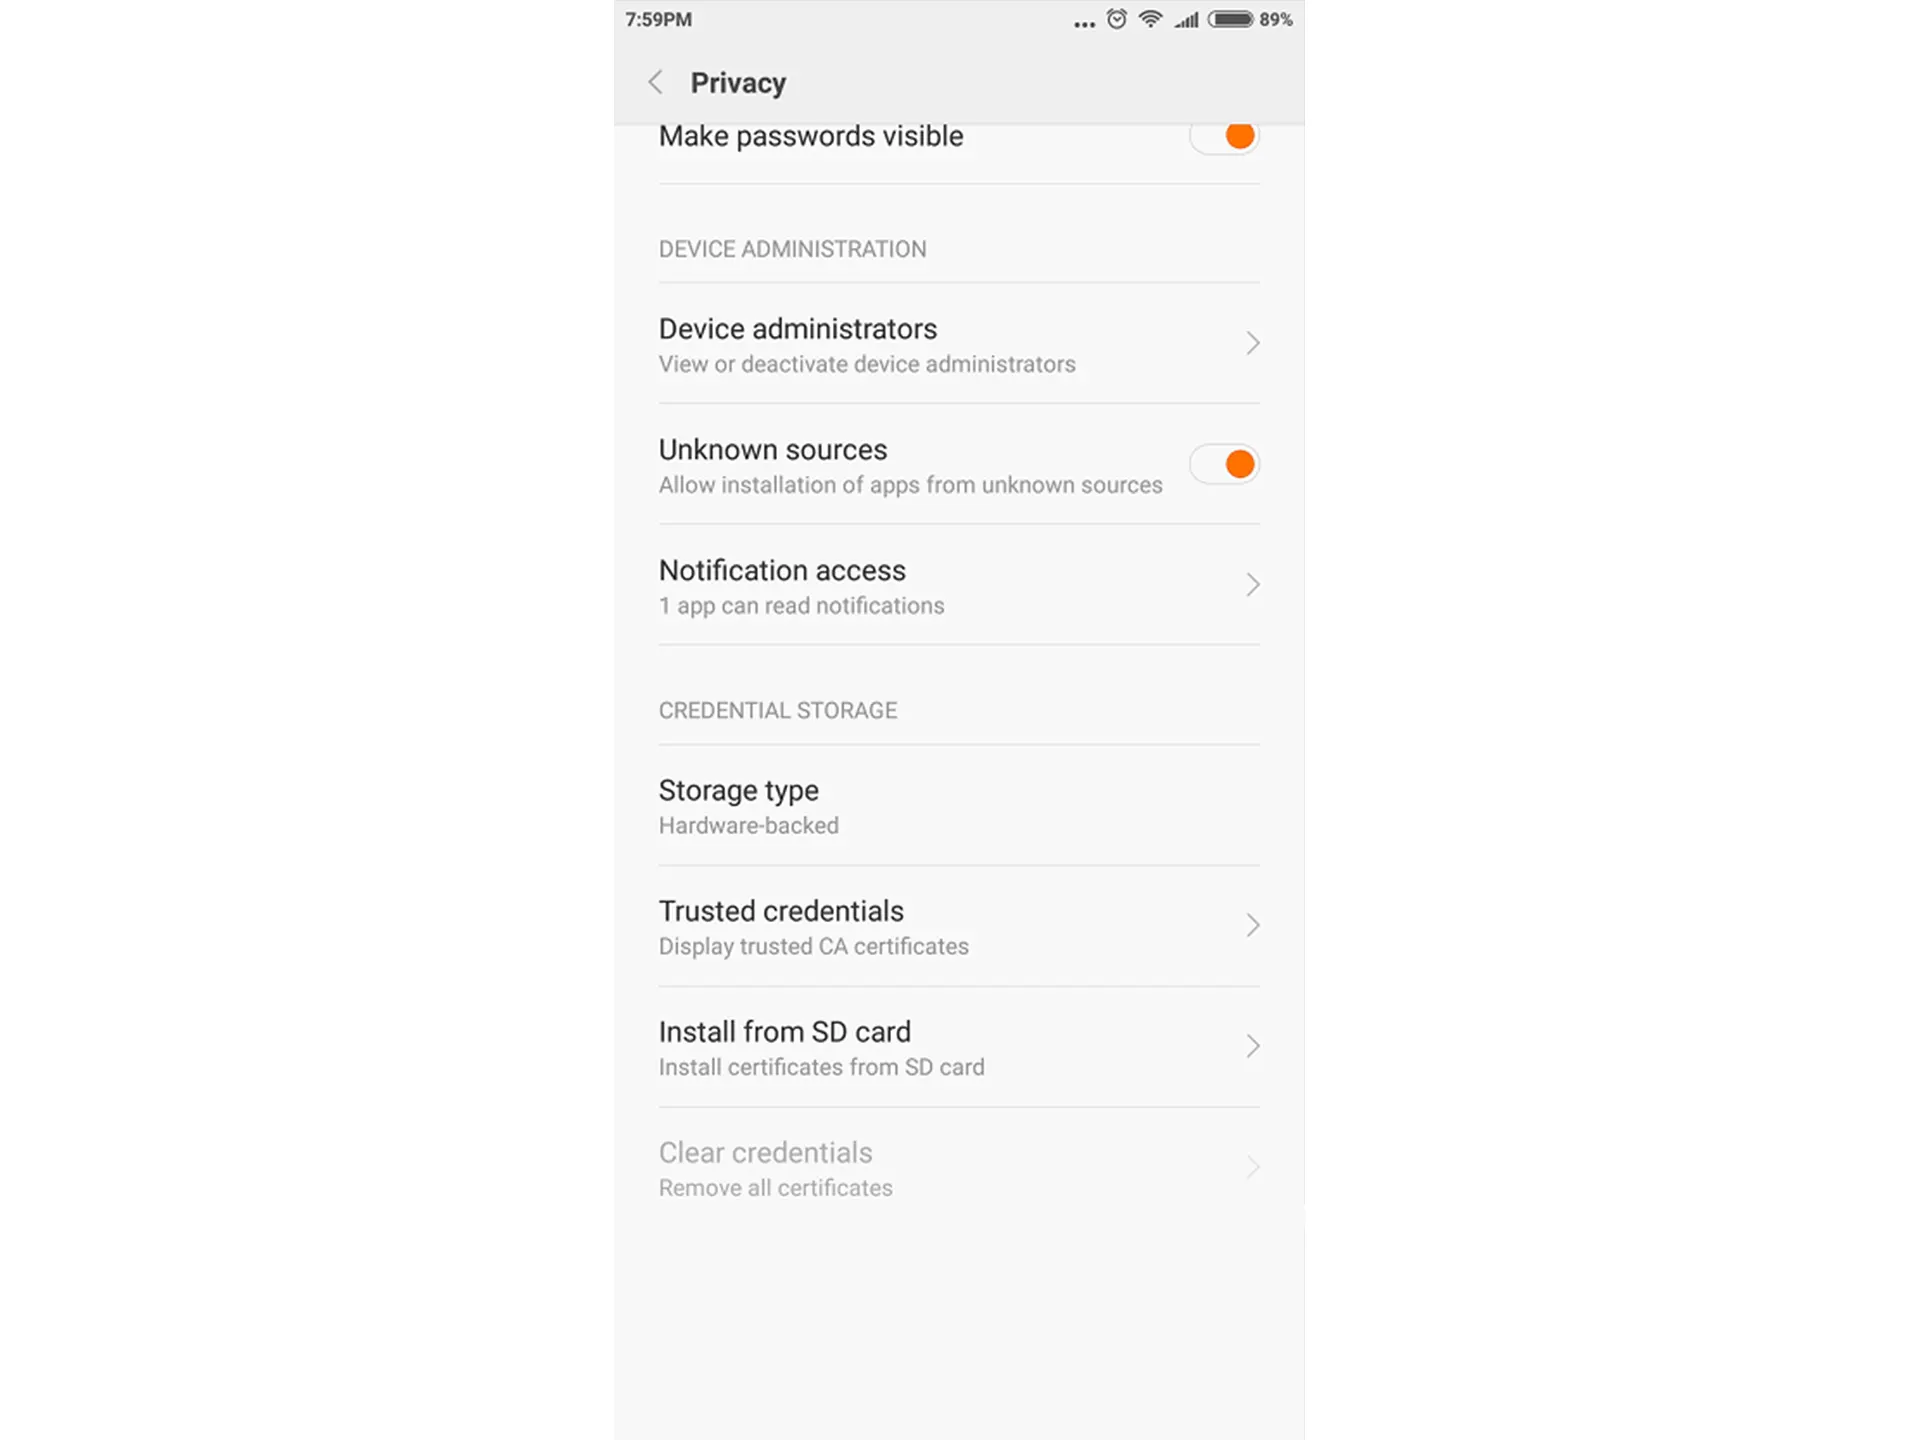 Disable security settings on your phone.